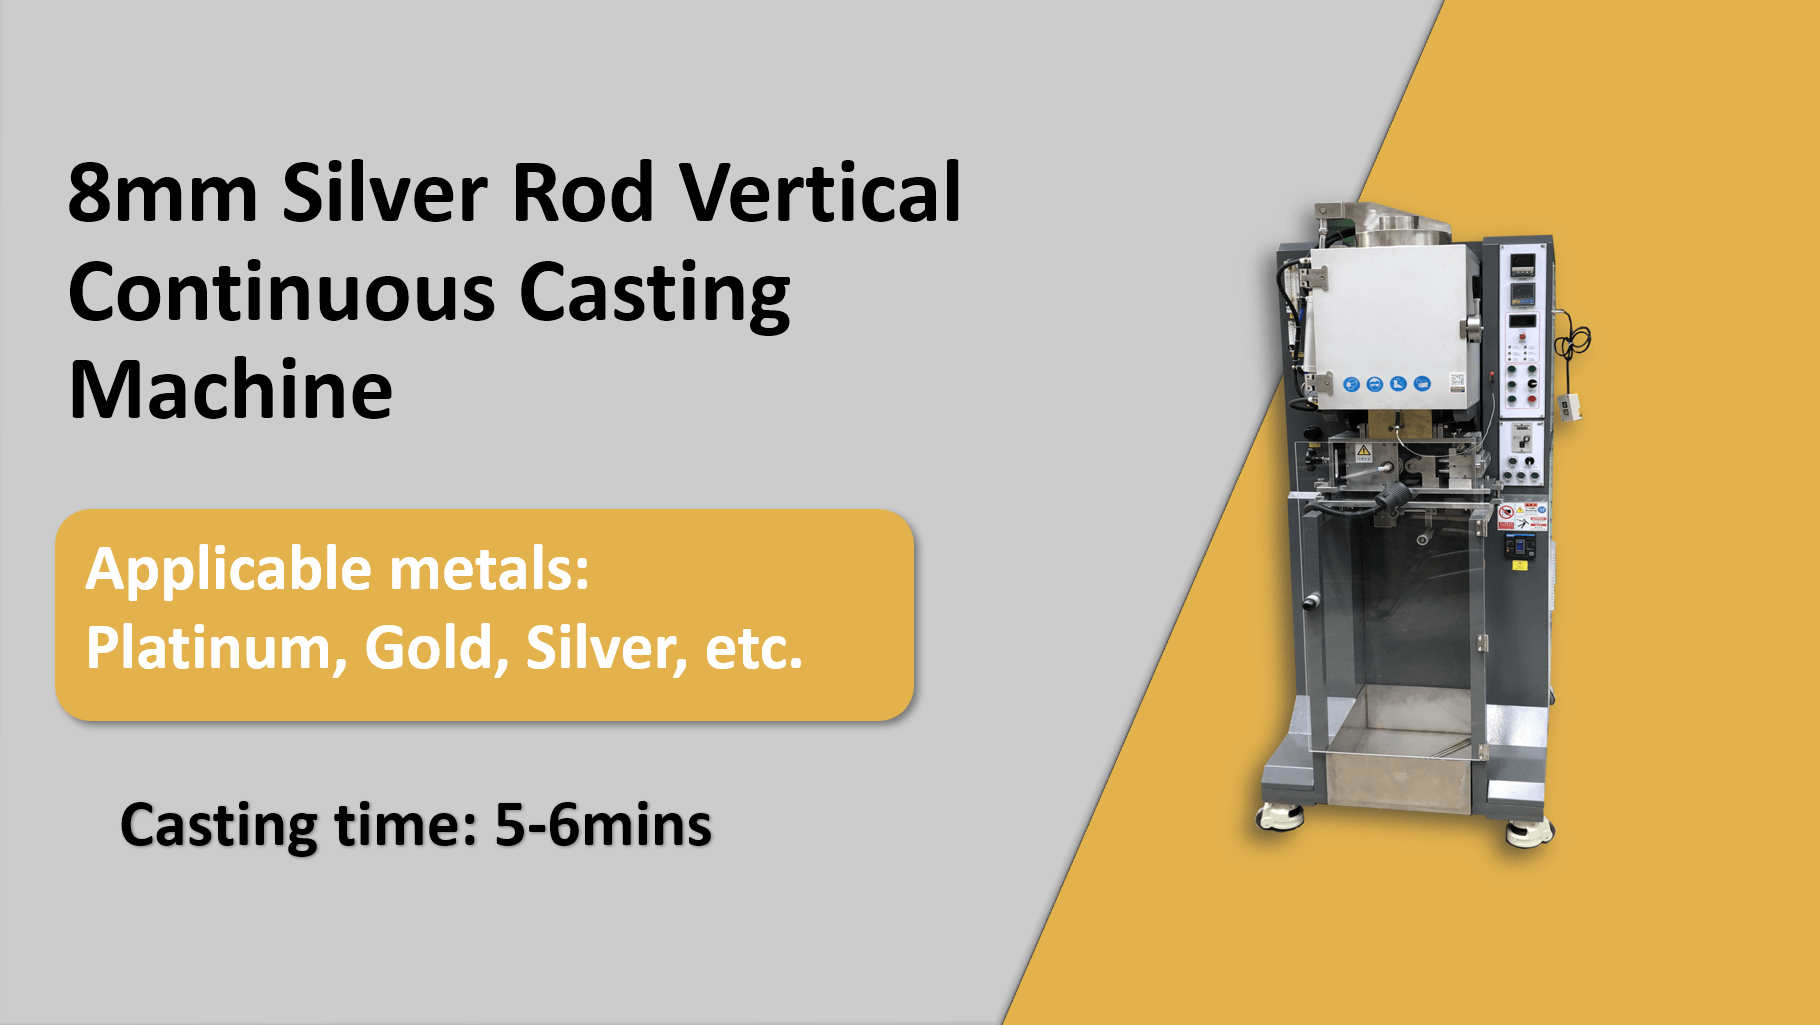 8mm Silver Rod Vertical Continuous Casting Machine